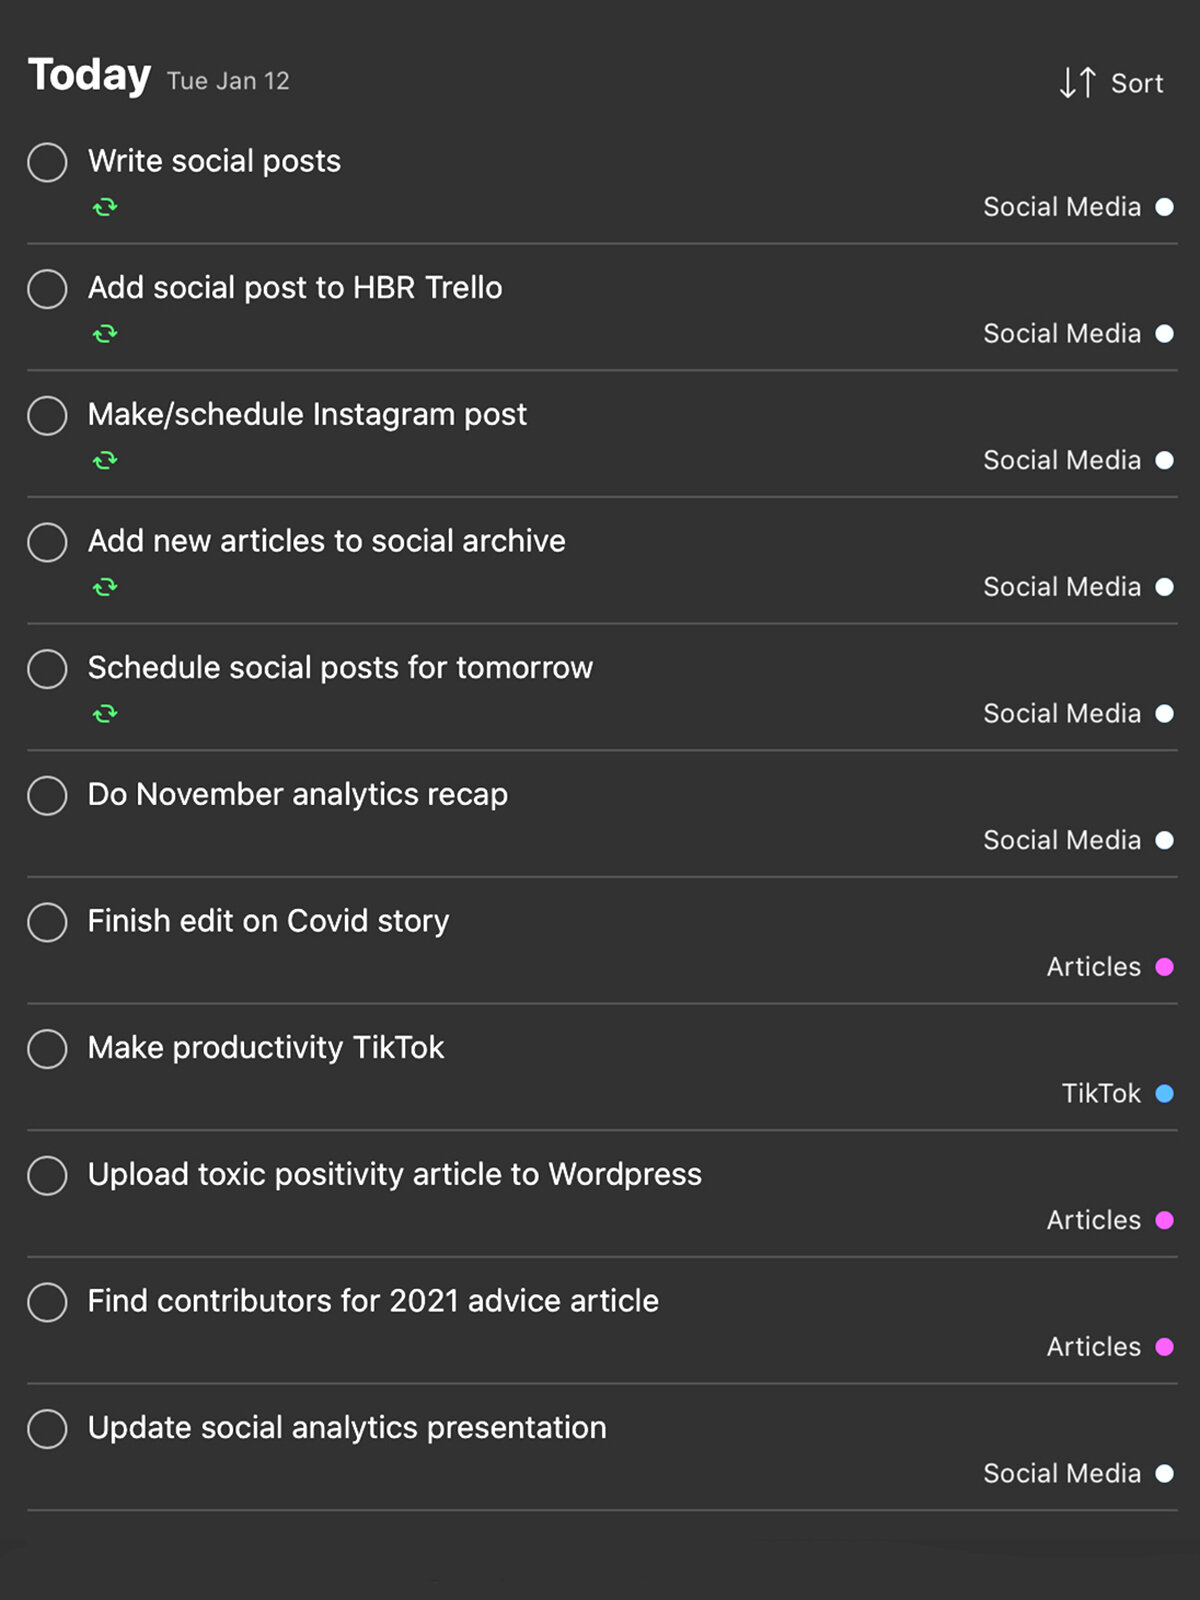 A screenshot of a task manager app listing all the day's to-dos